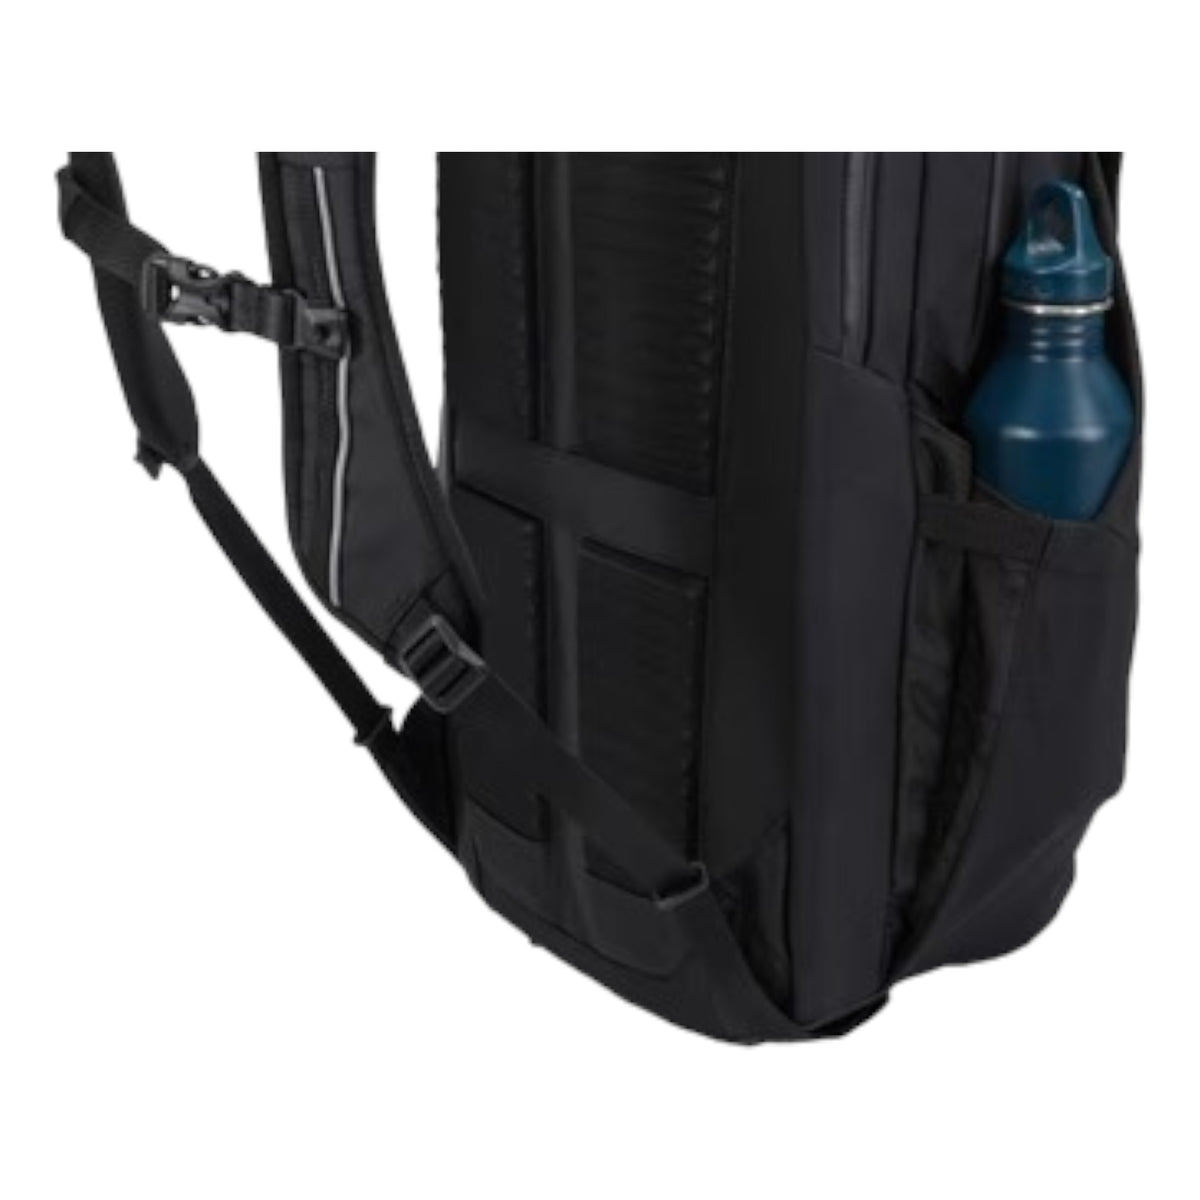  Paramount Commuter 27L BackPack